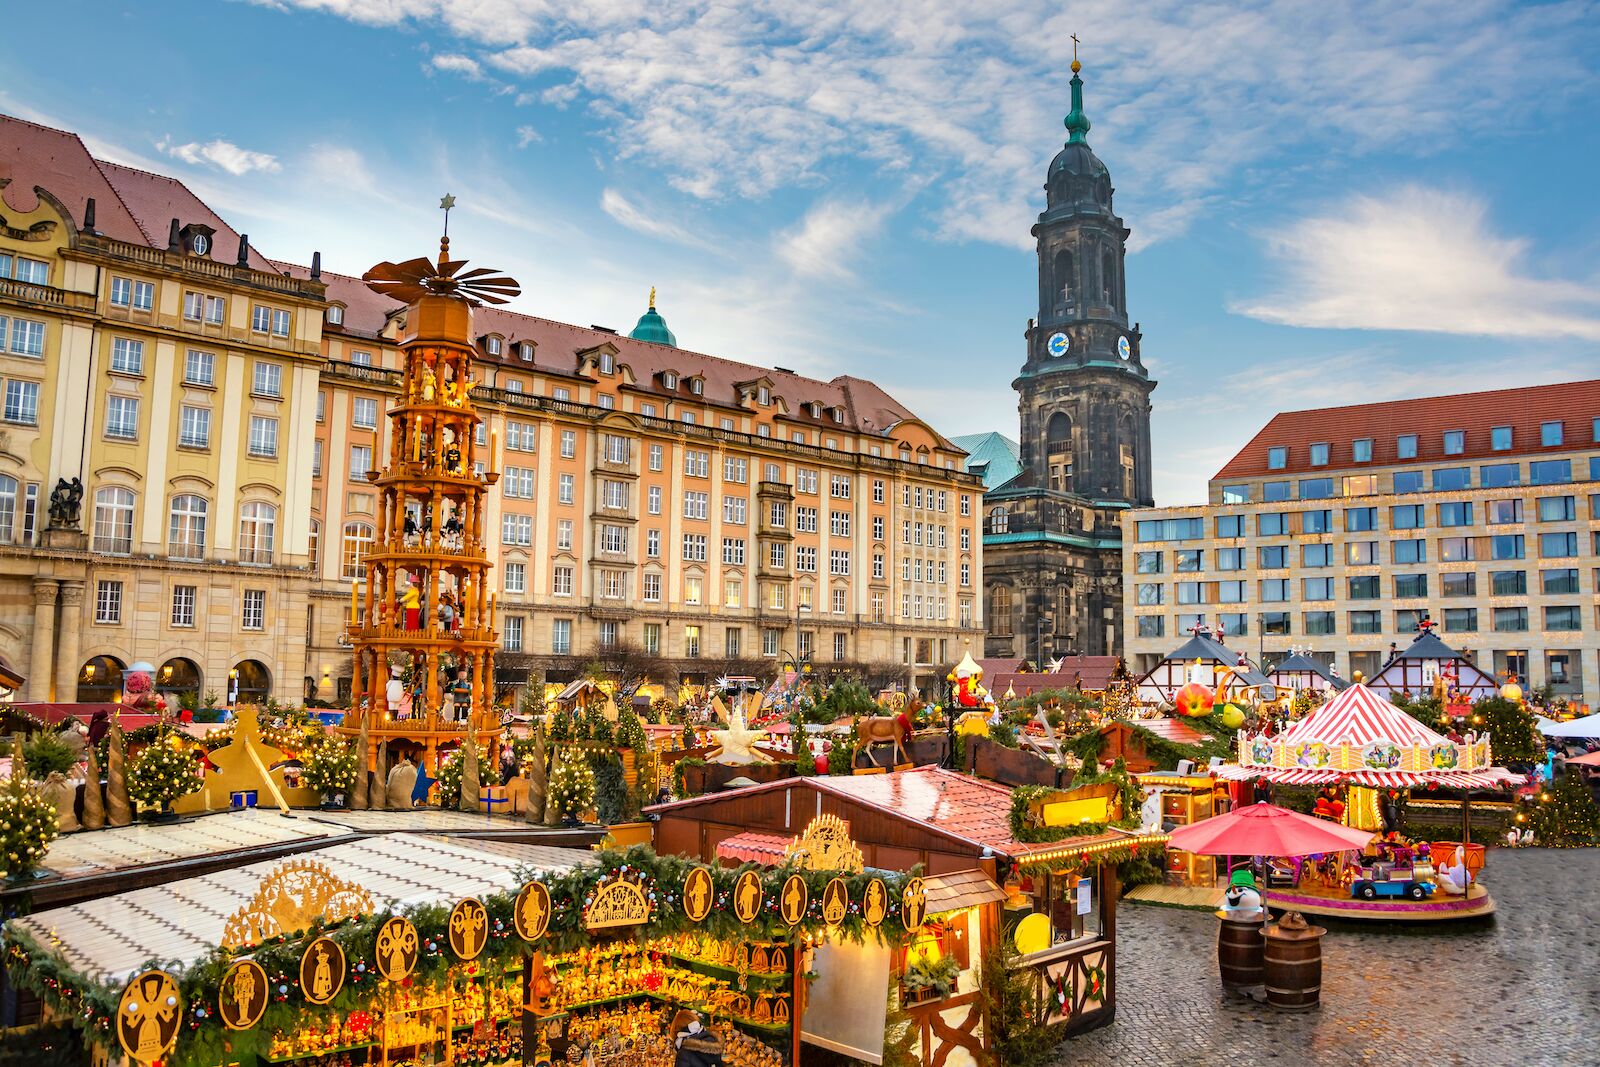 At the one the most grand Christmas markets in Europe, the Dresden Striezelmarkt, a giant Christmas tree and stalls decorated with Christmas lights are set up in the town square  